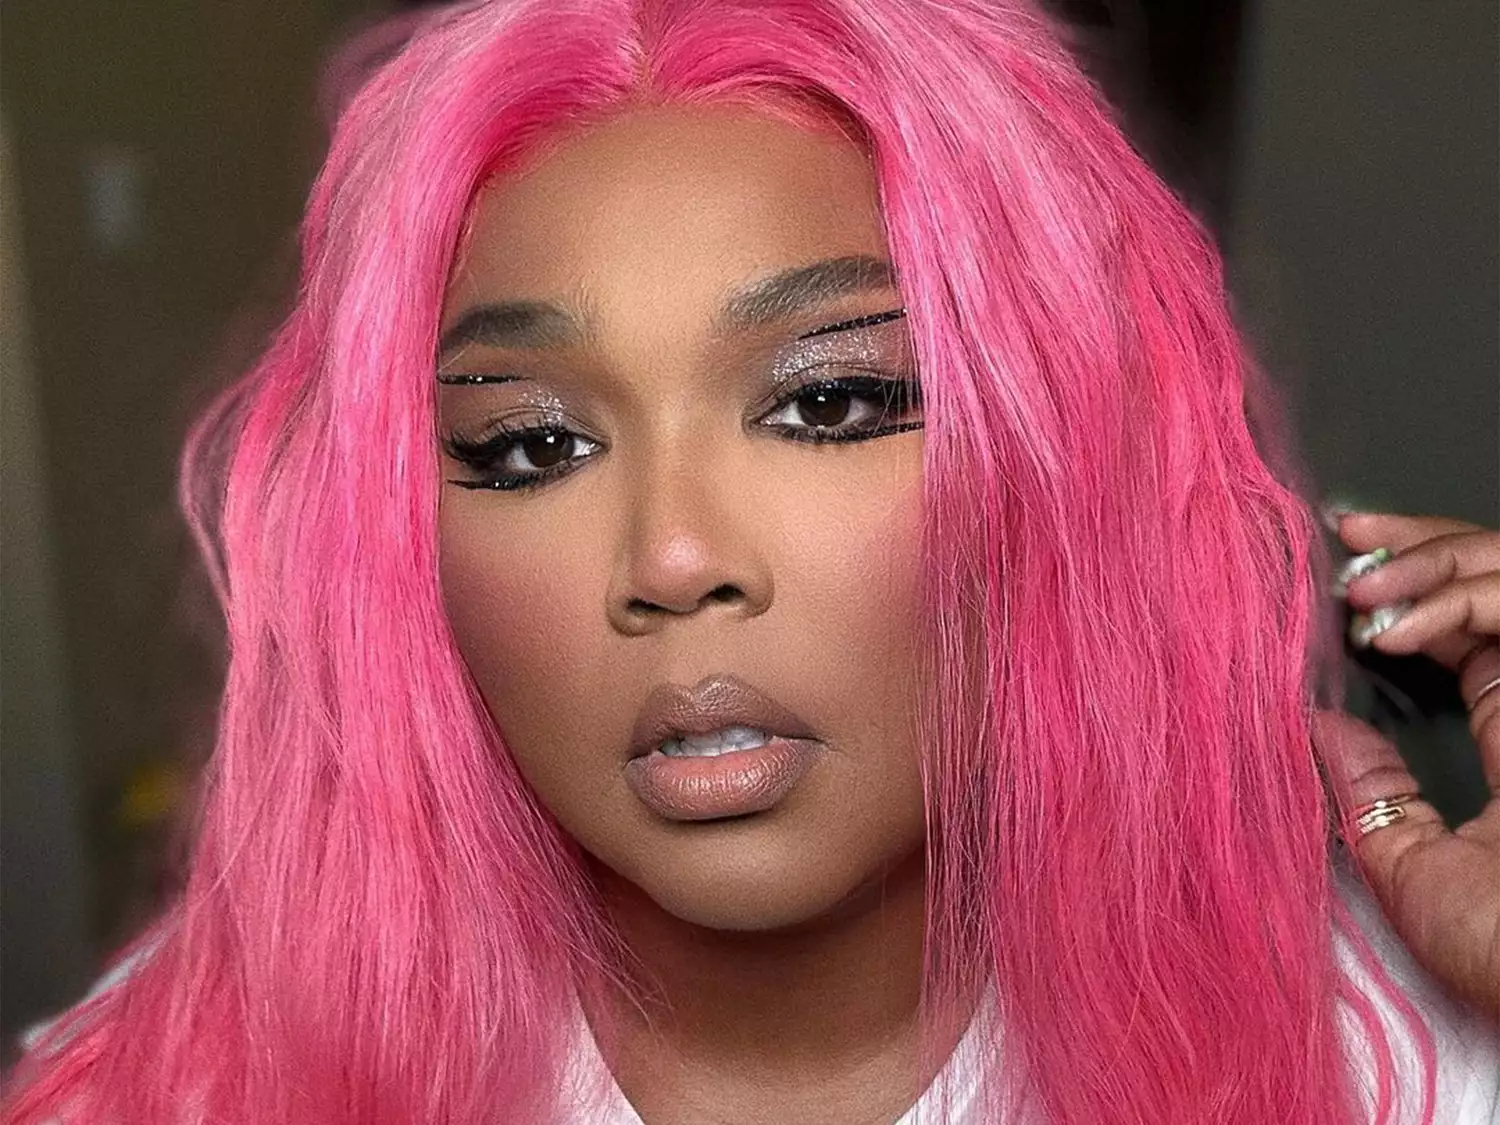 Lizzo wearing a hot pink wig and sea glass gem manicure 